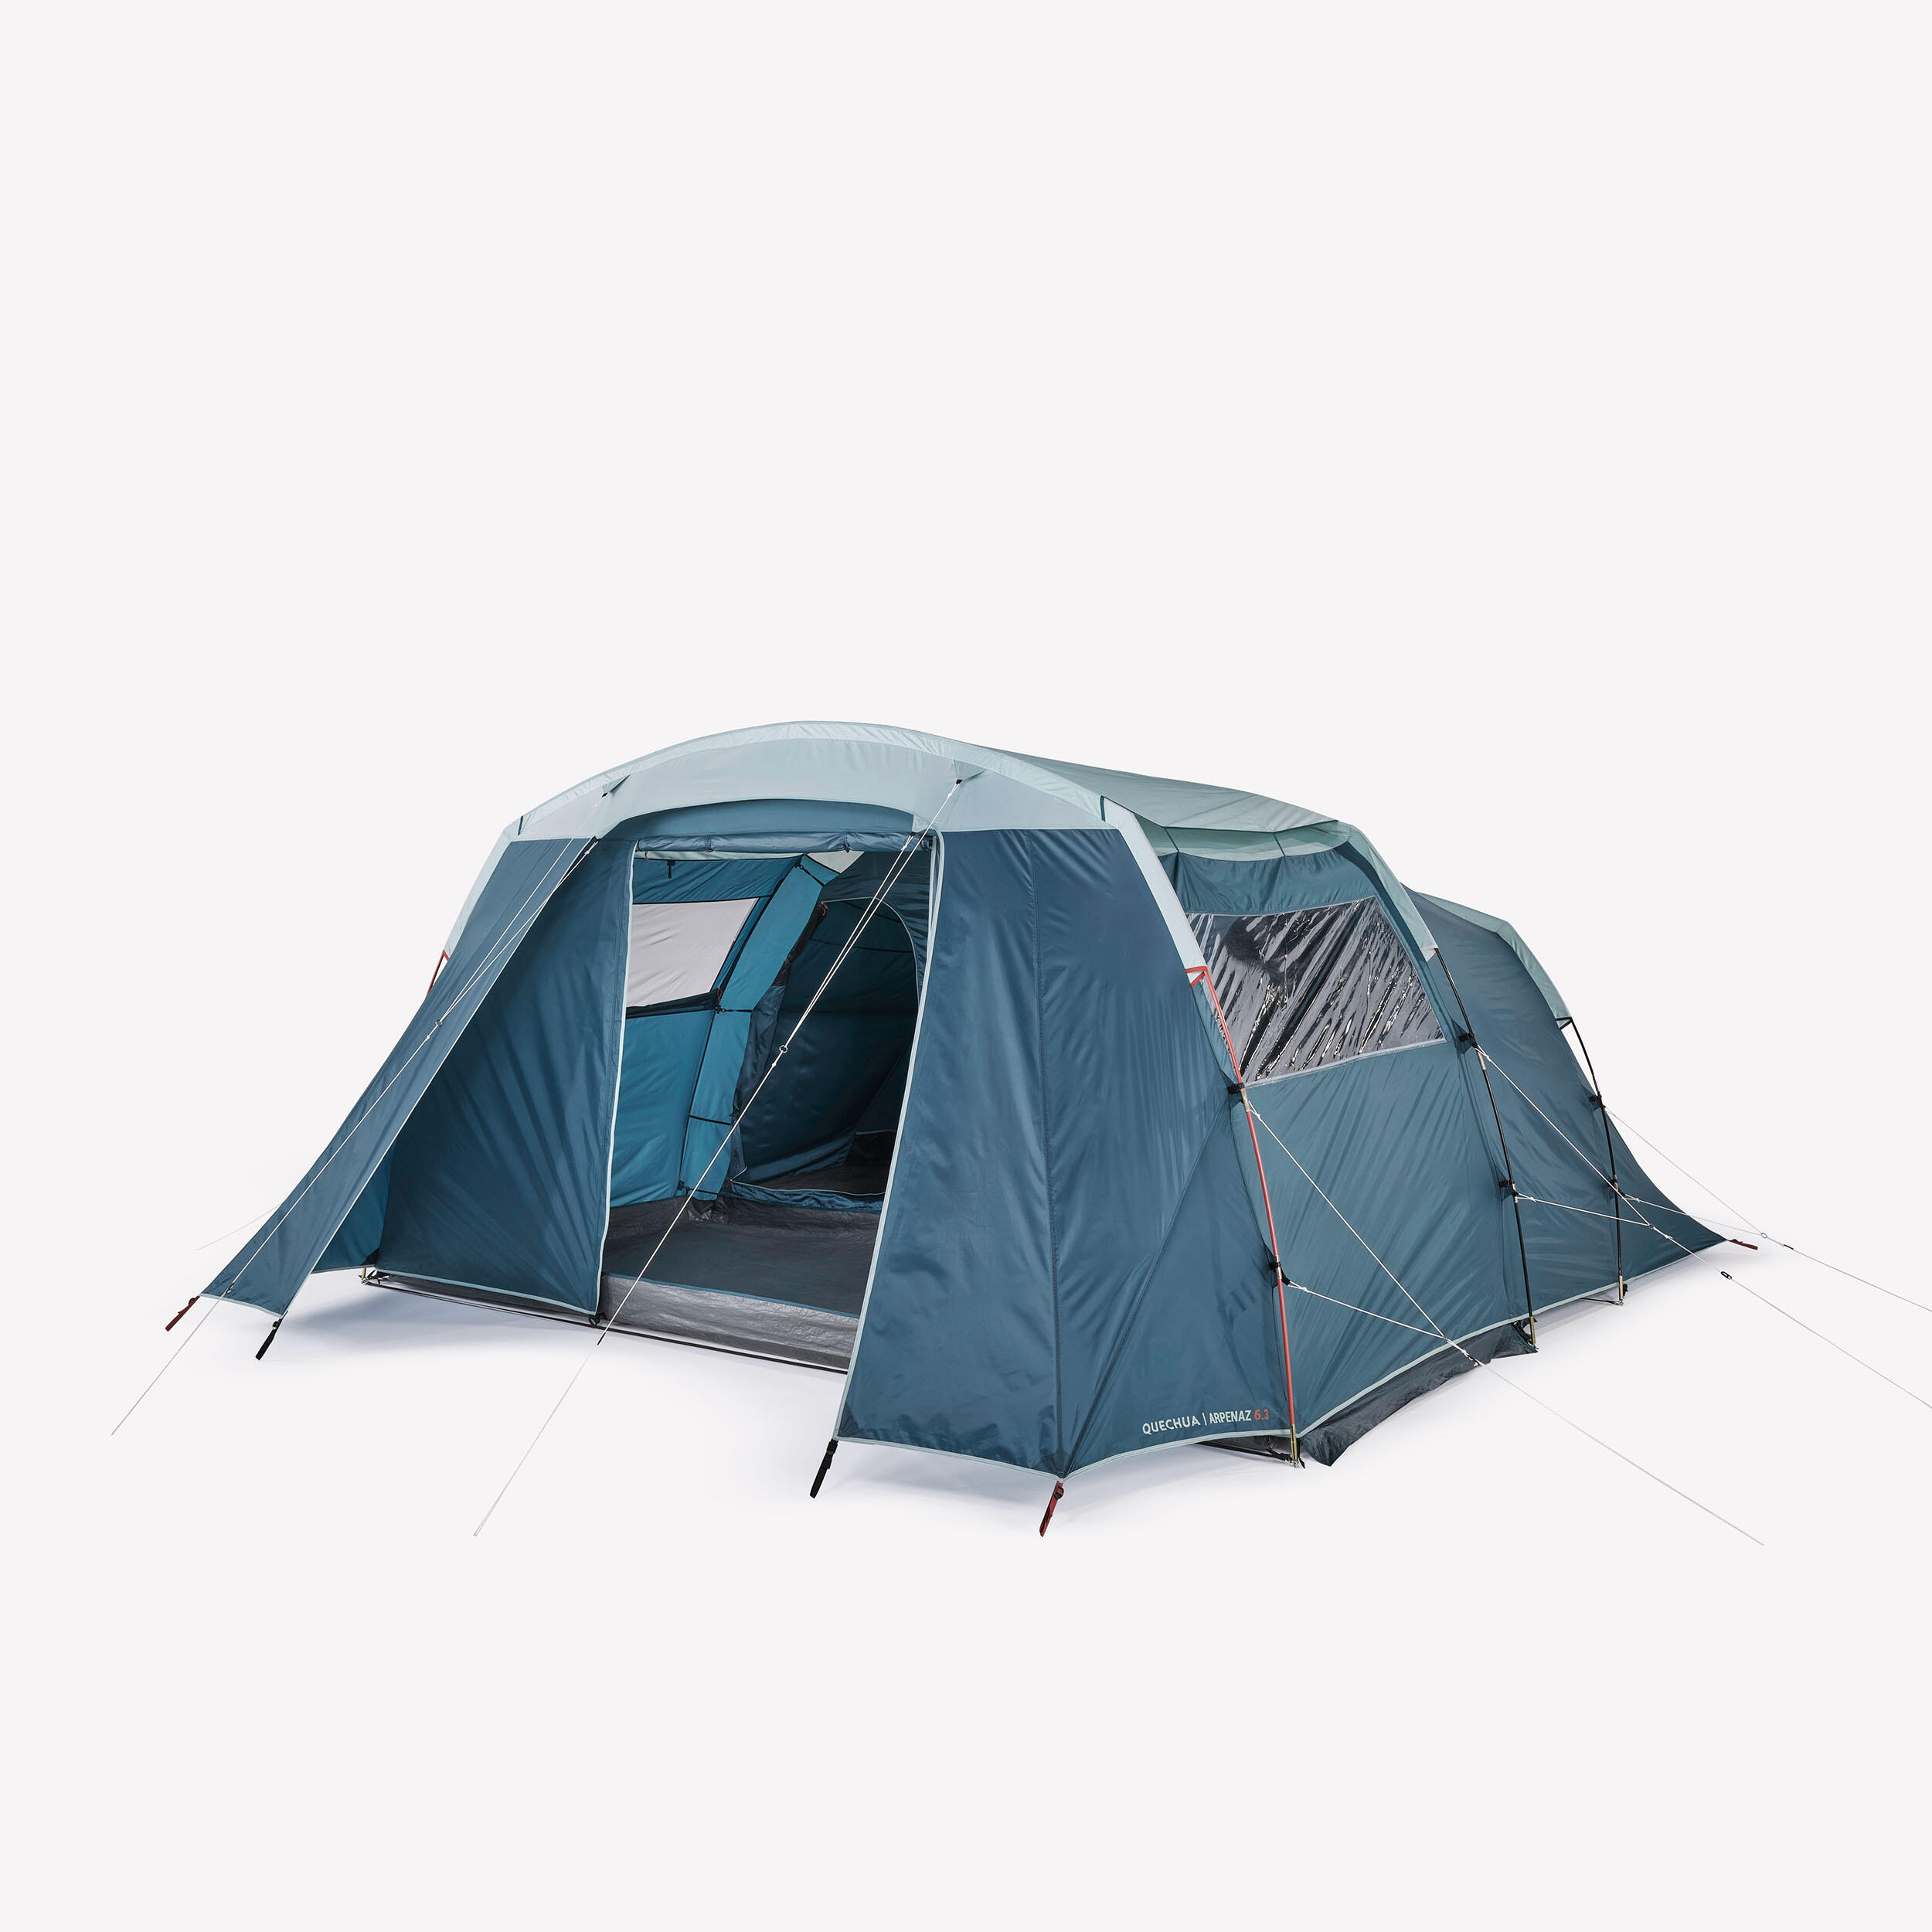 Camping hoop tent - Arpenaz 6.3 - 6-Person - 3 Rooms 1/14